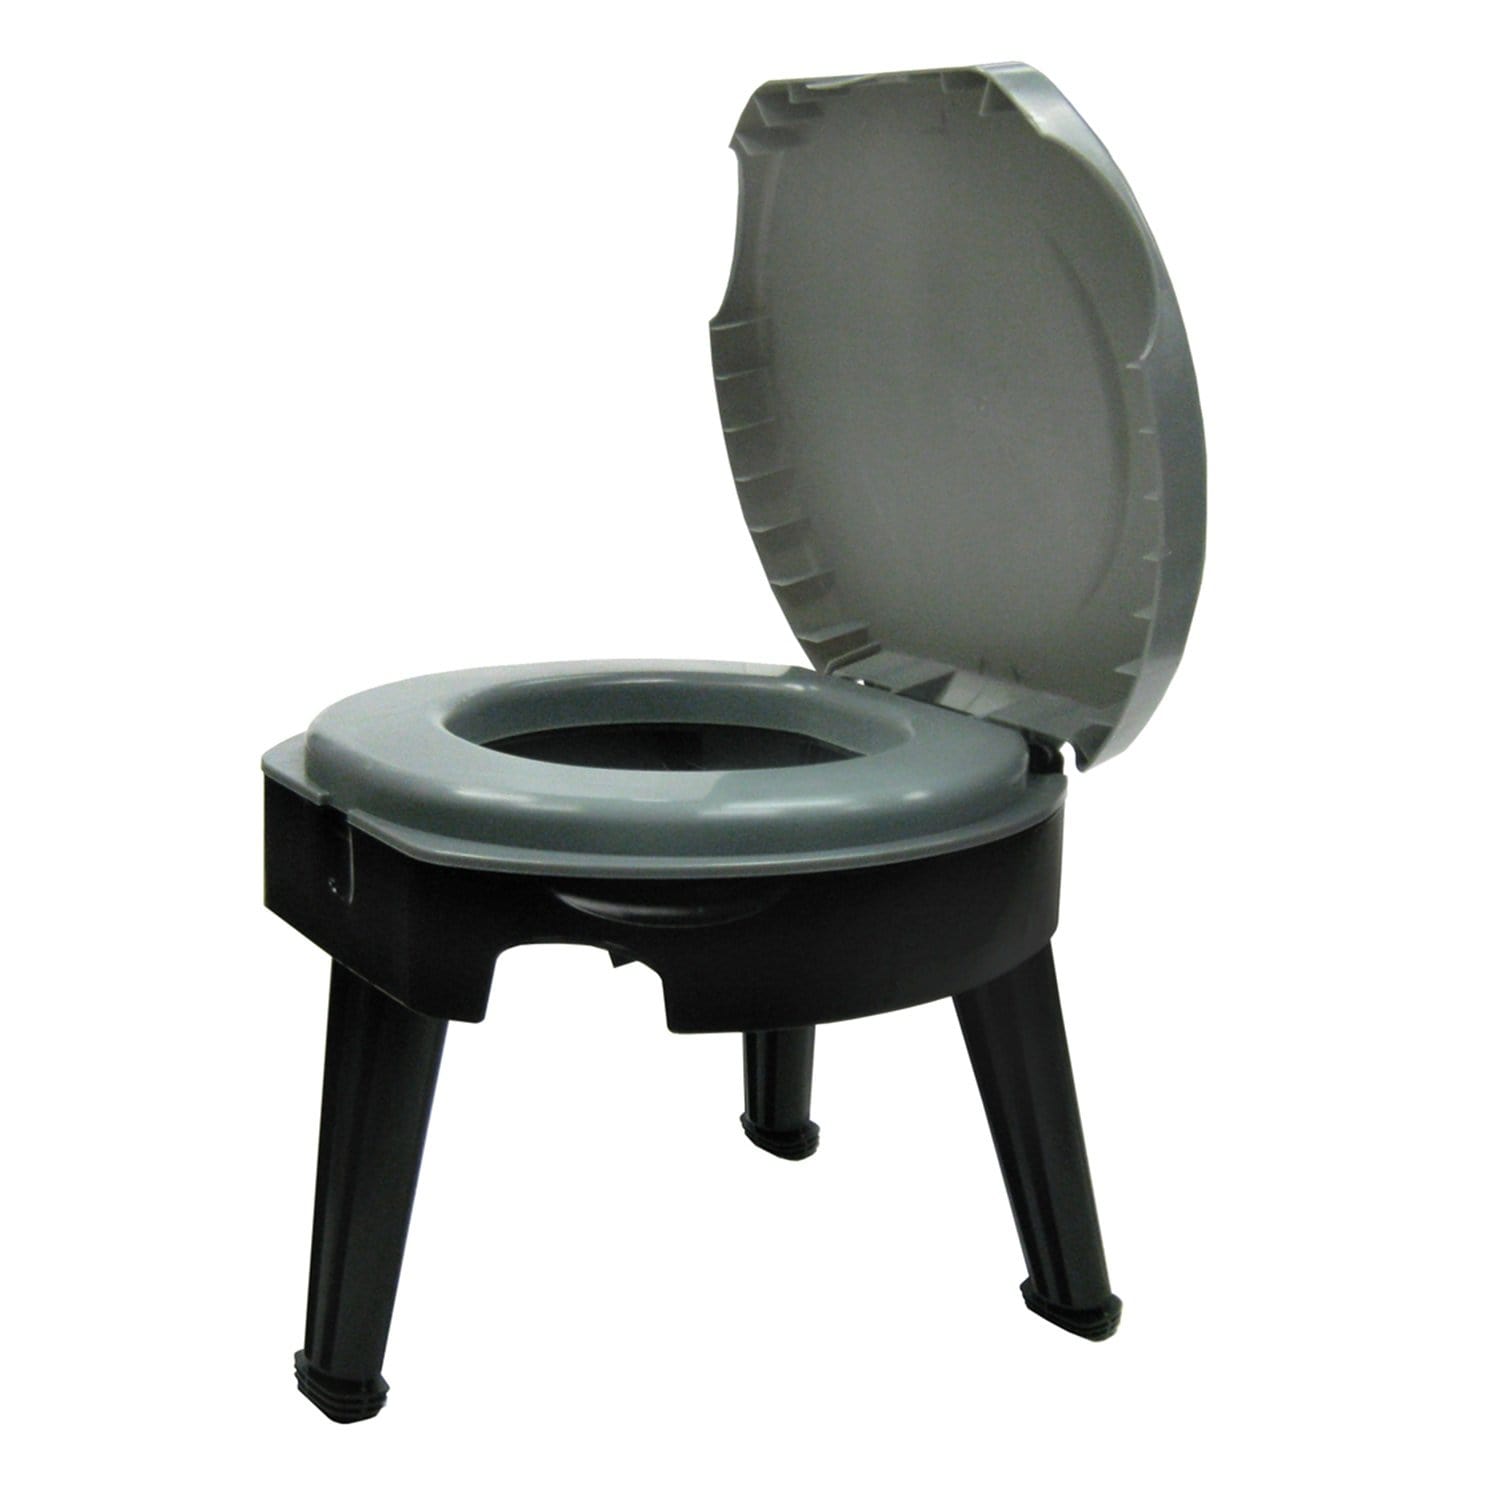 Reliance Camping & Outdoor : Accessories Reliance Fold-To-Go Collapsible Portable Toilet